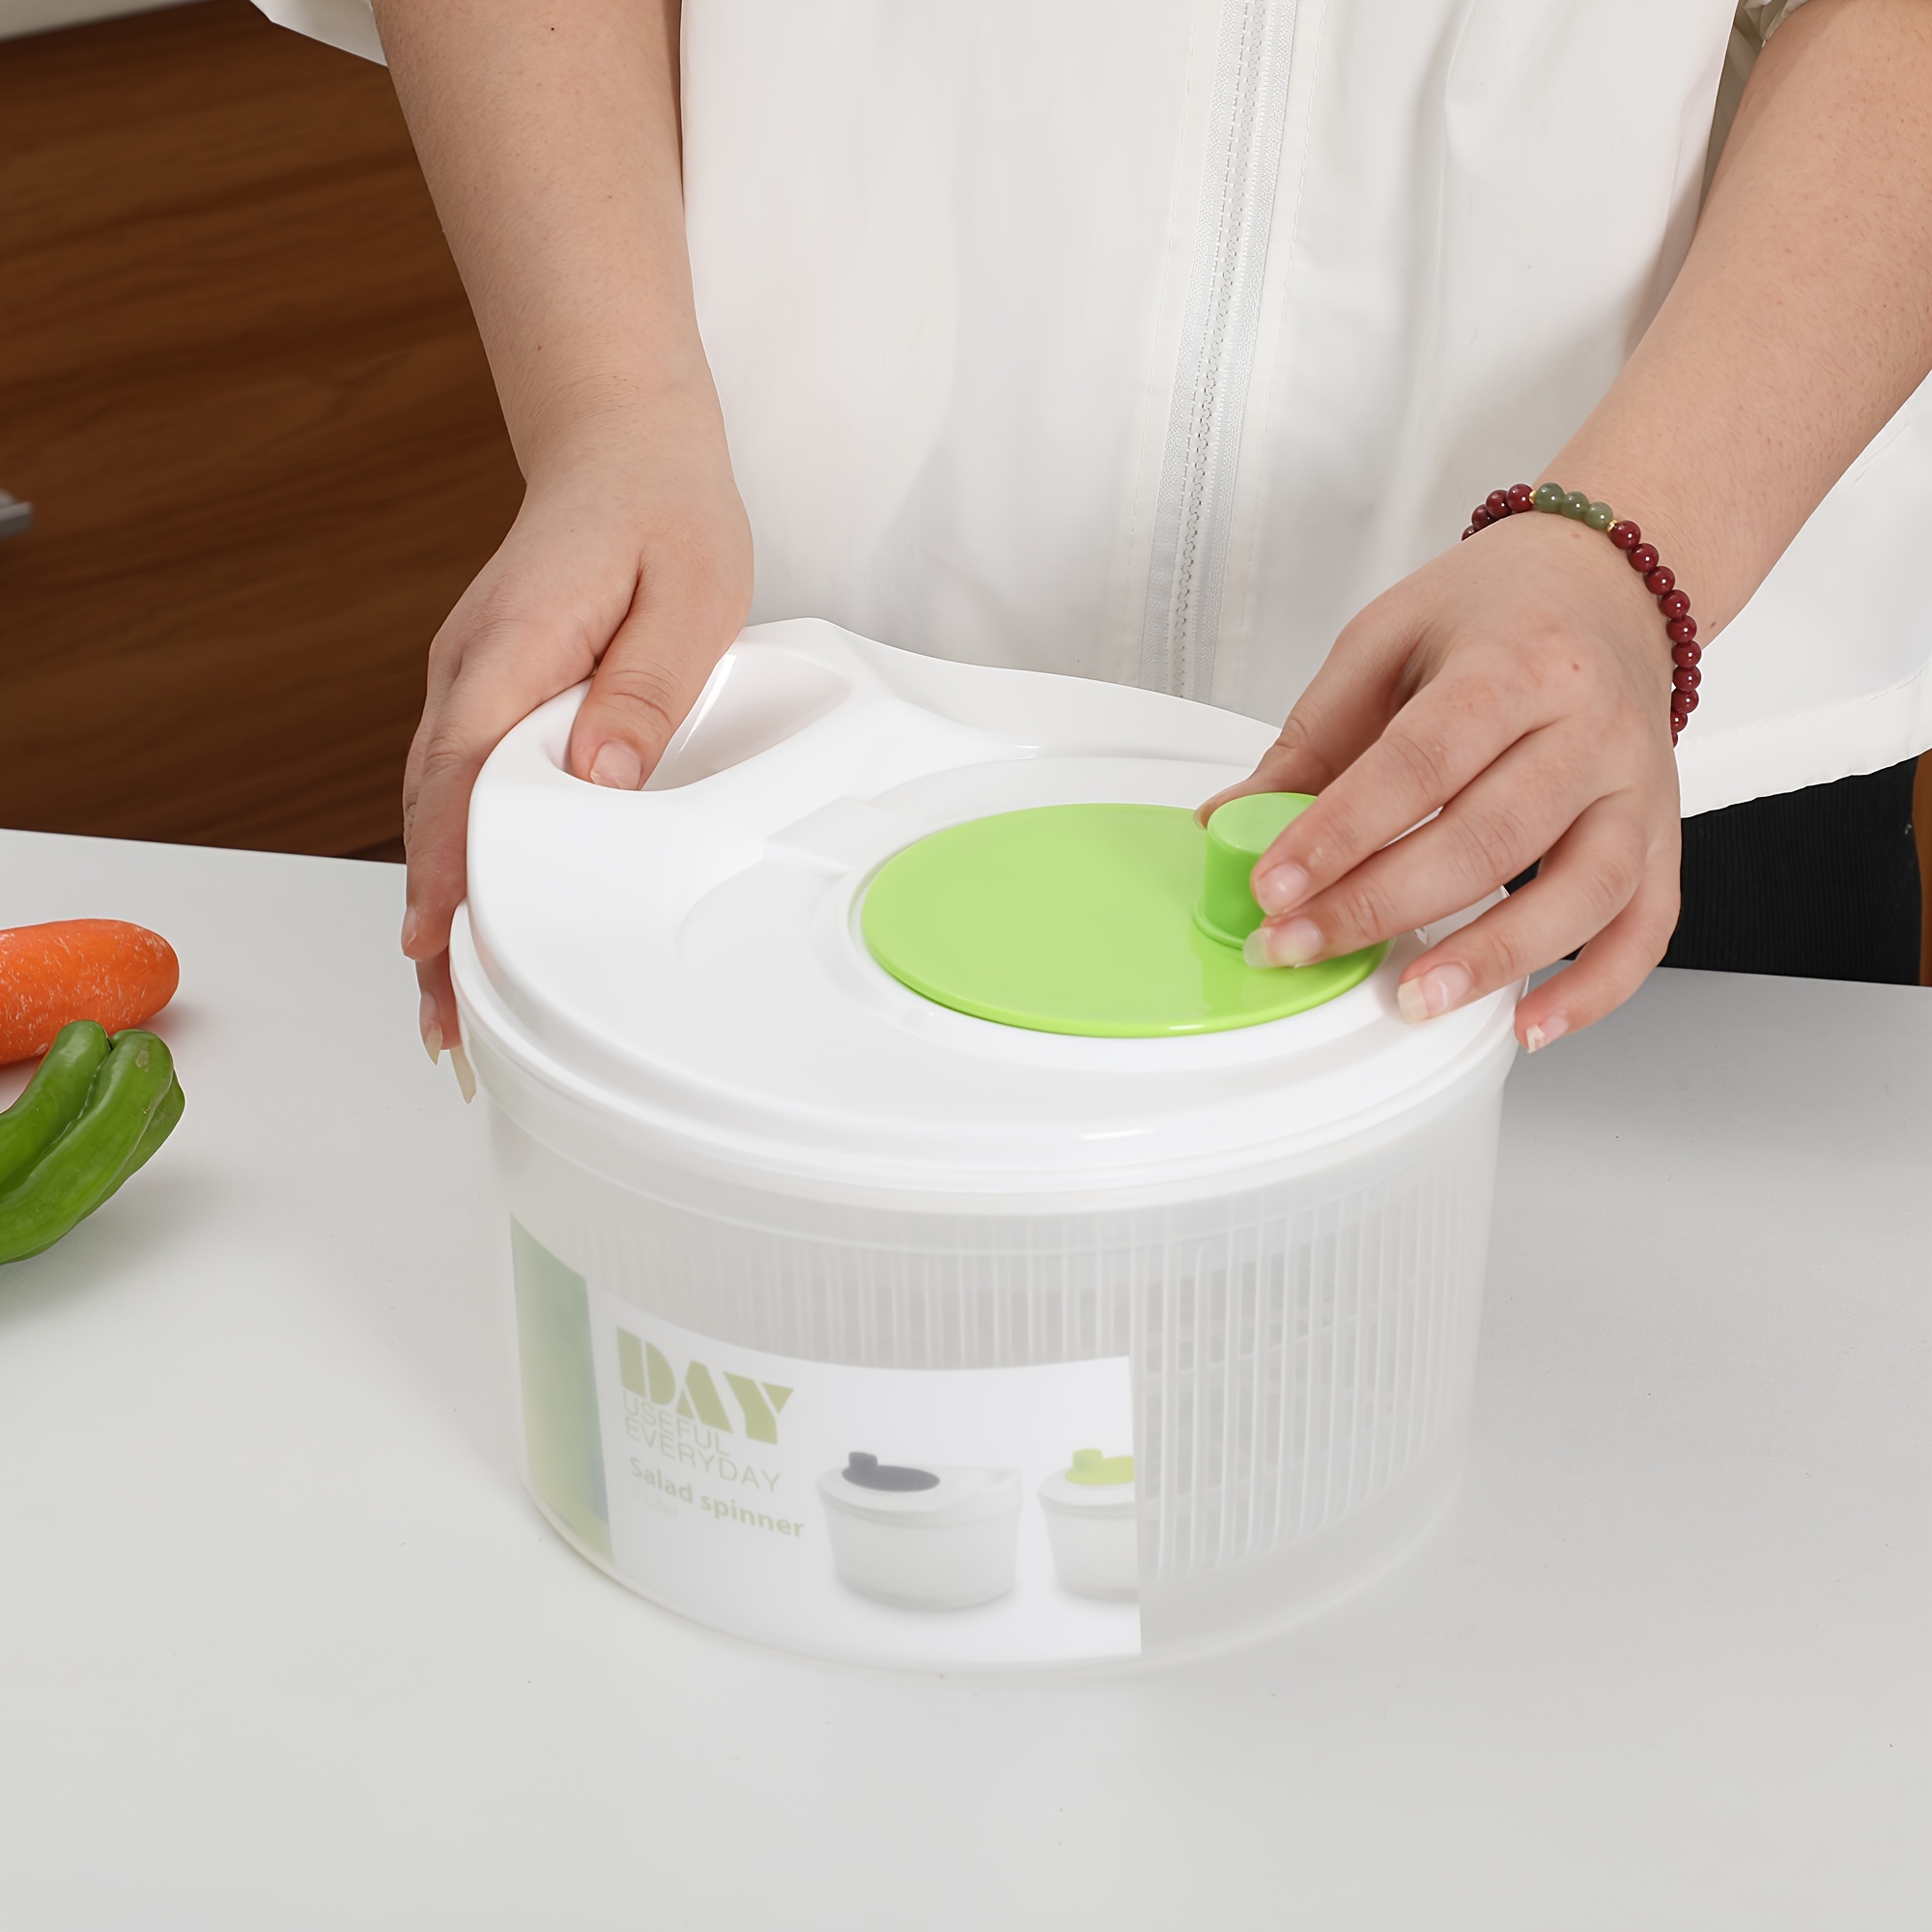 Sturdy And Multifunction vegetable spinner 